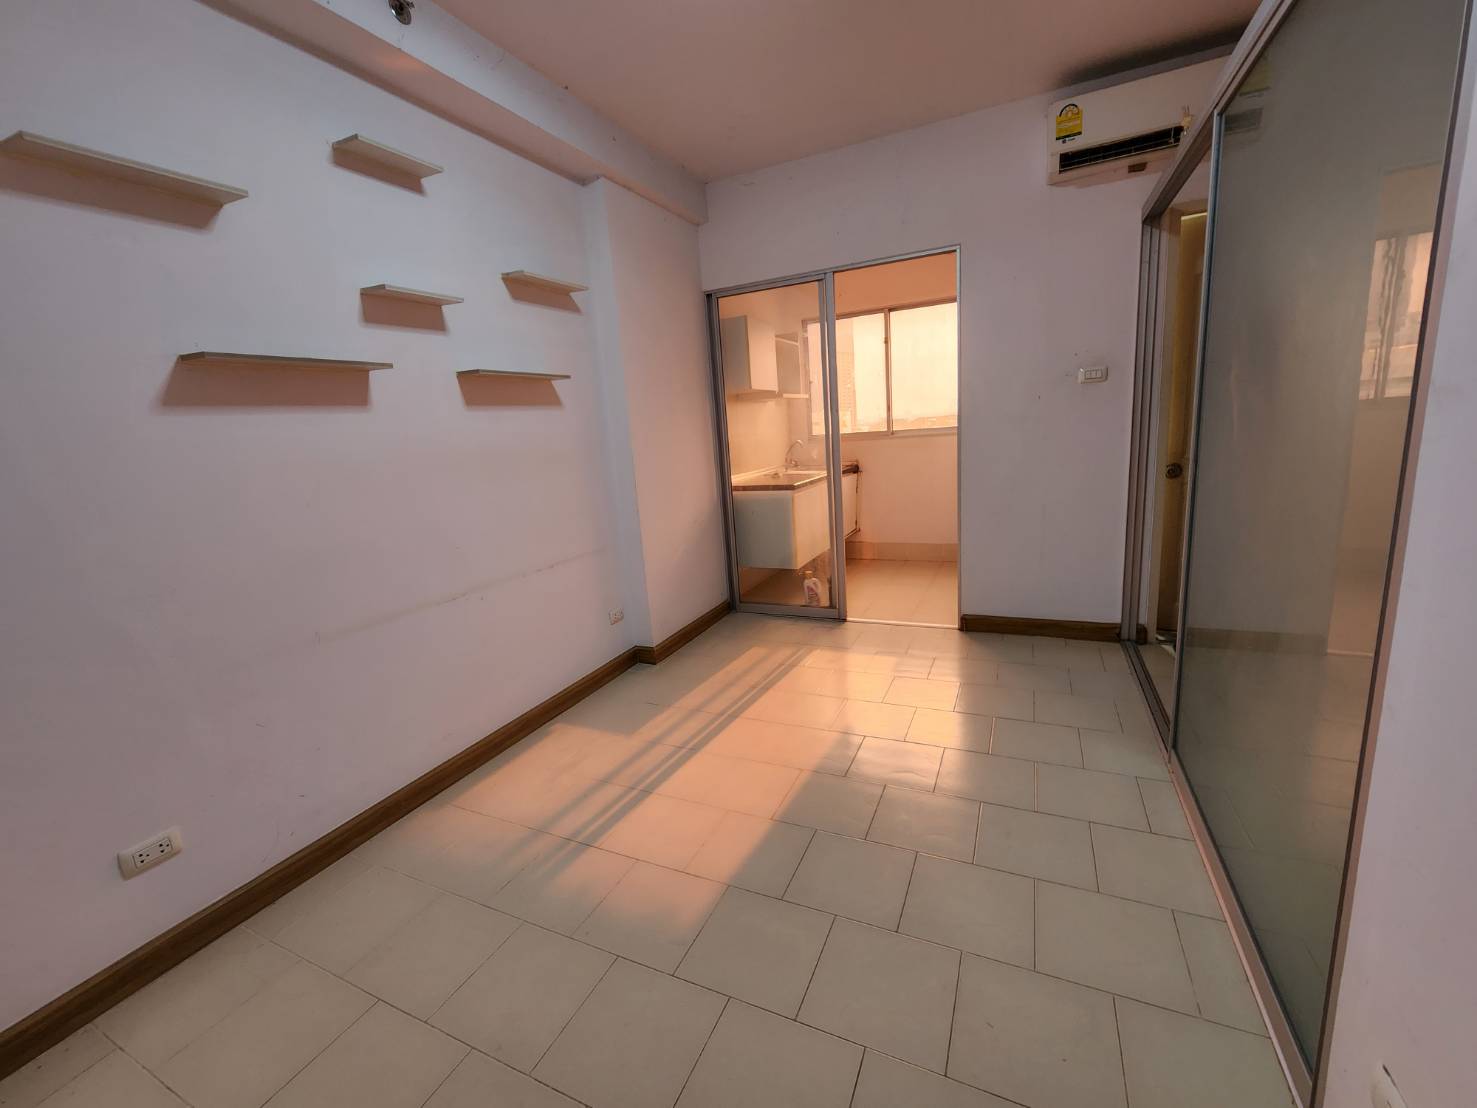 The best price !! Sale City home condo nearly MRT Yellow Line just 5 minute